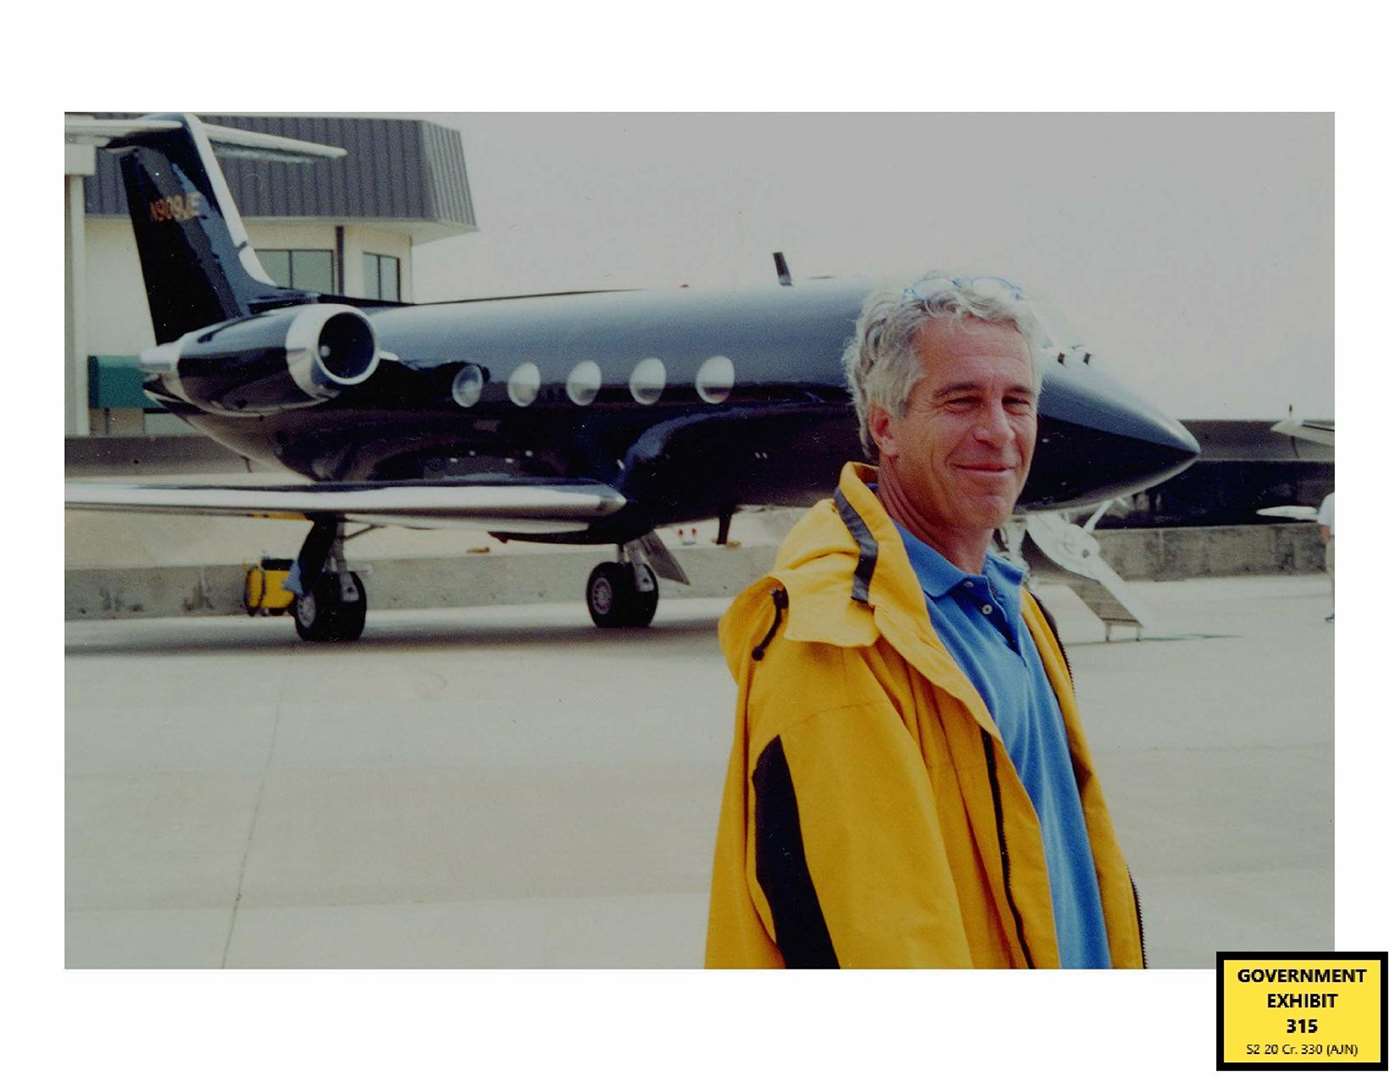 Girls were flown to Epstein’s properties on the disgraced financier’s private planes (US Department of Justice/PA)